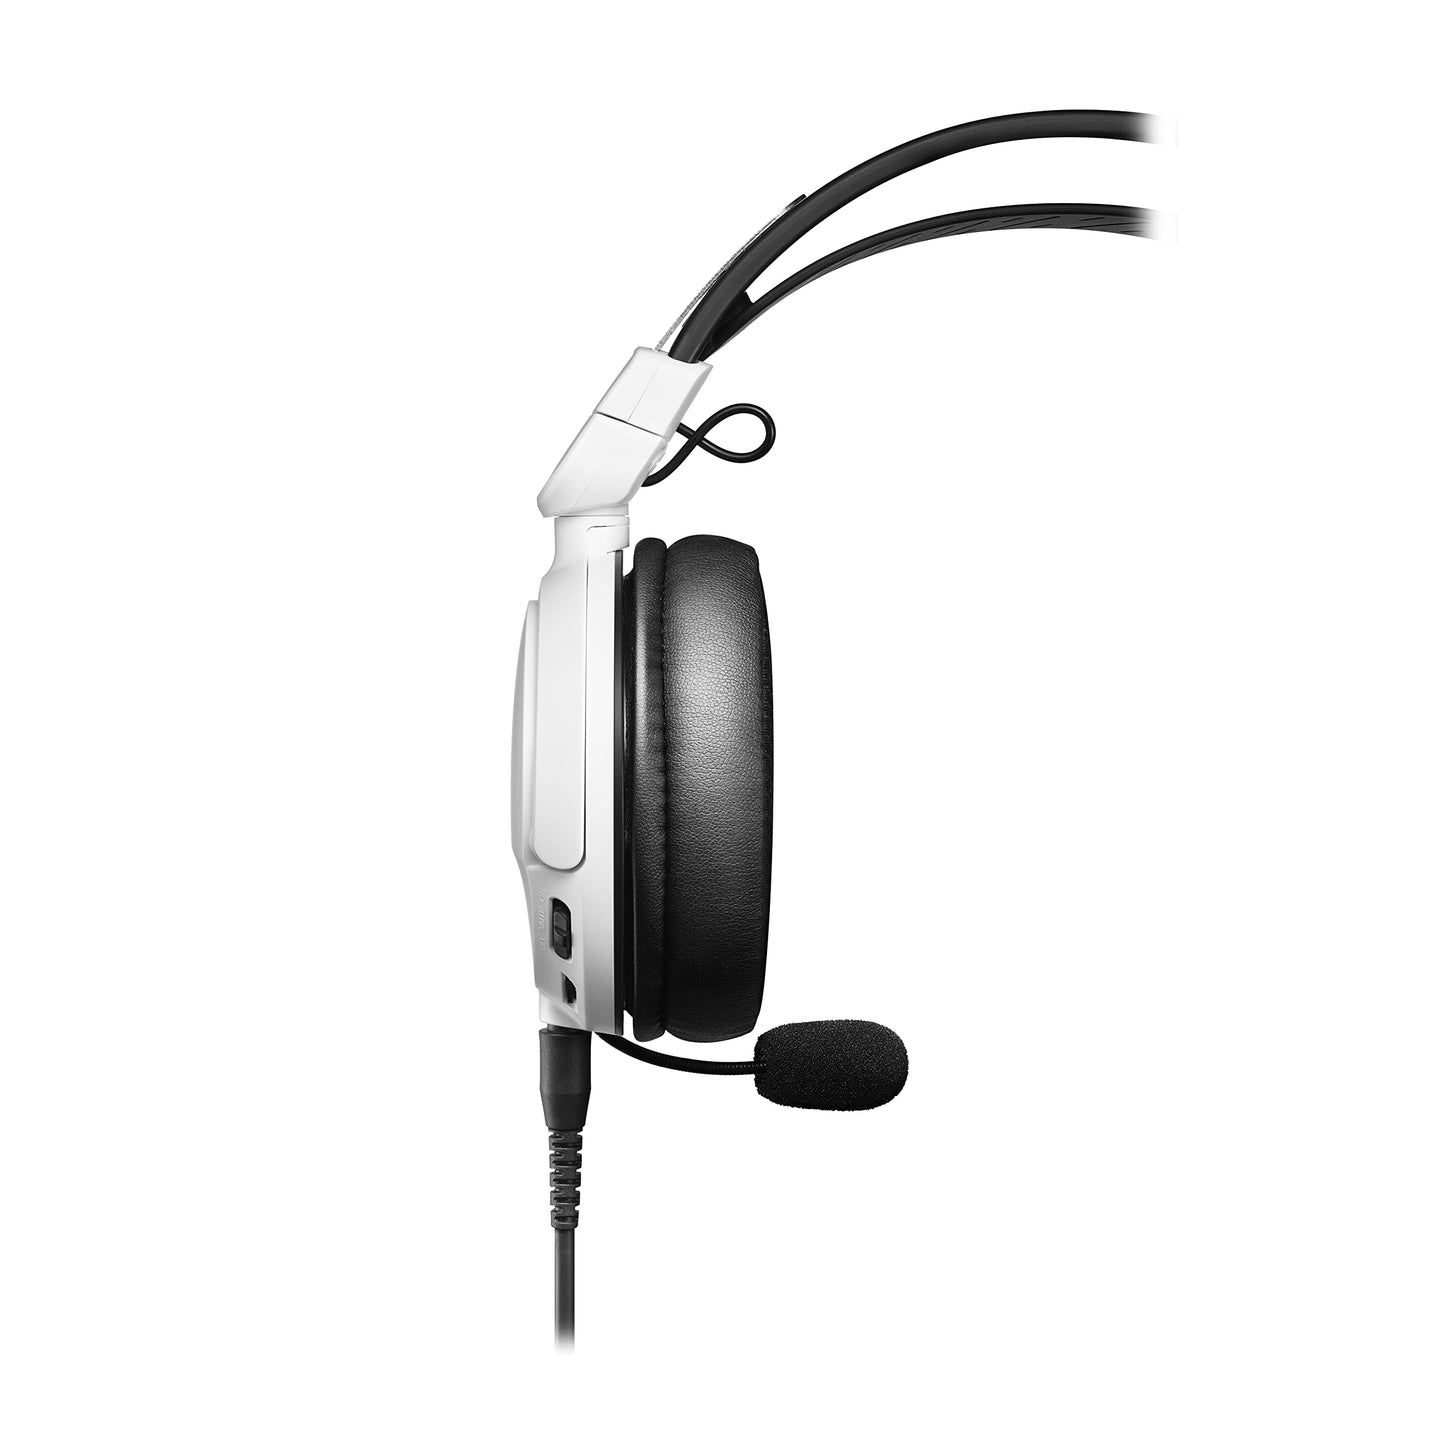 Audio-Technica ATH-GL3WH Closed-Back Gaming Headset, White